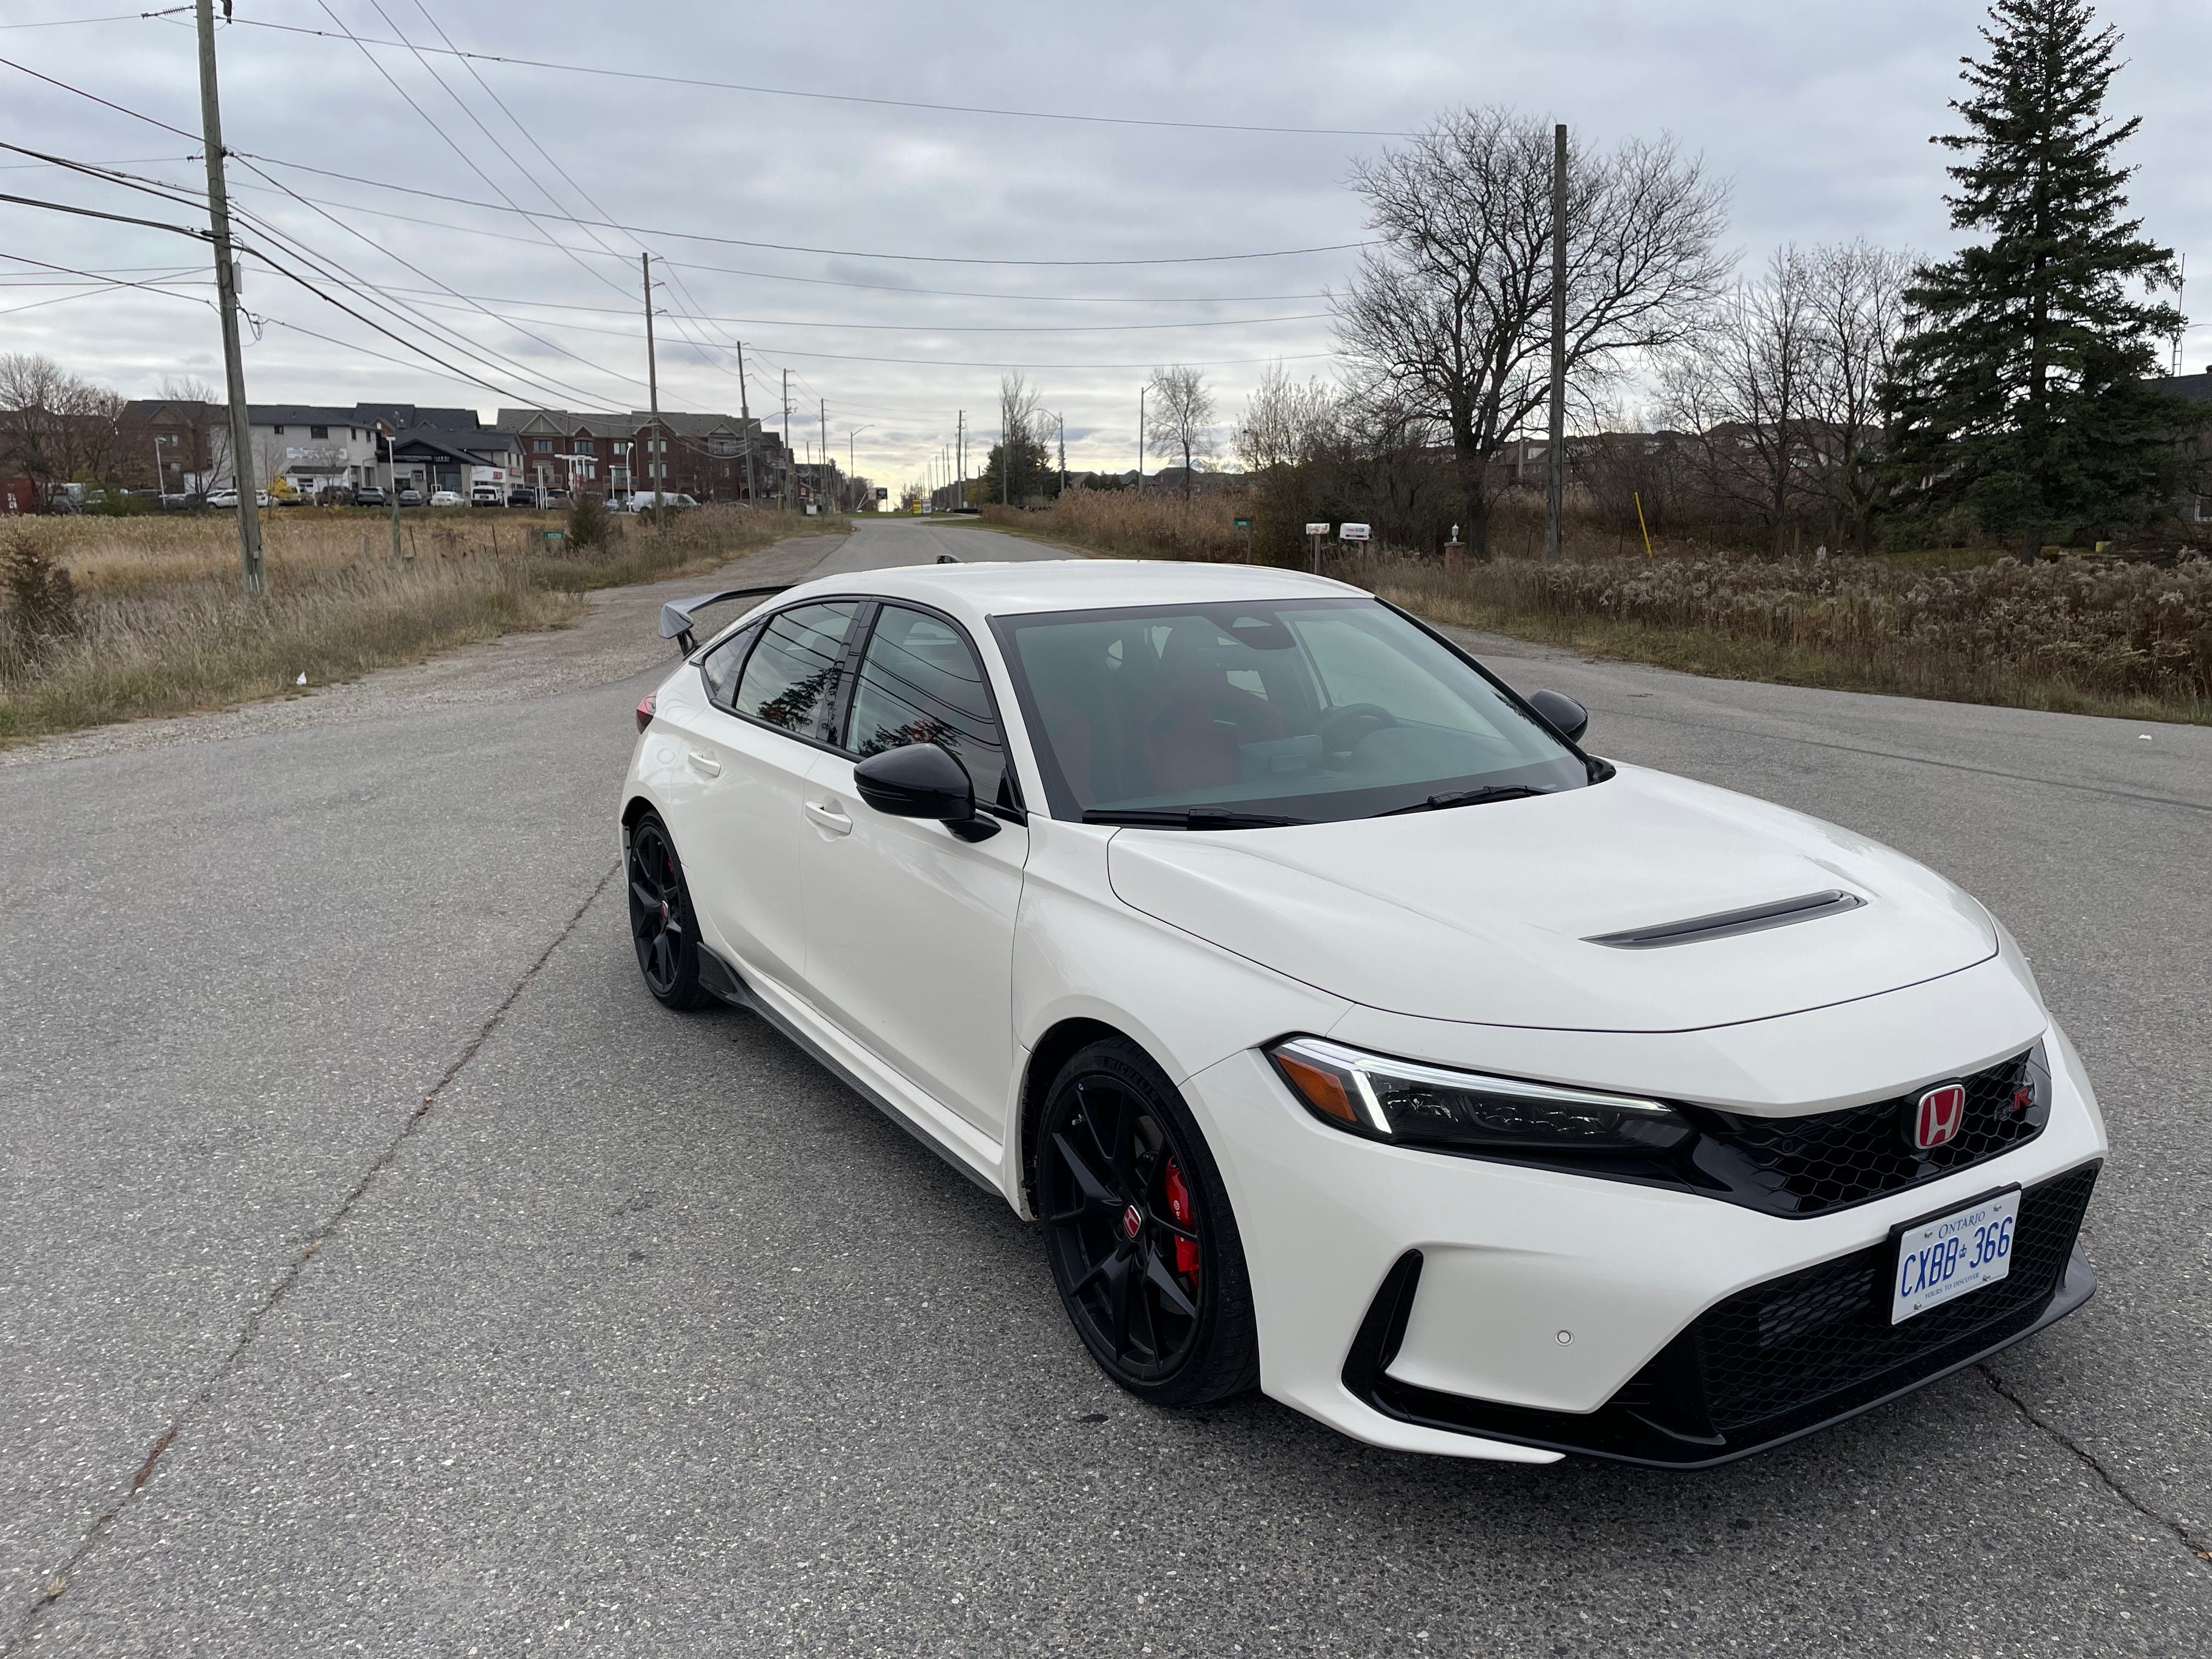 enke januar Kalksten Review: 2023 Honda Civic Type R is a future classic as hot hatch market  heats up - The Globe and Mail